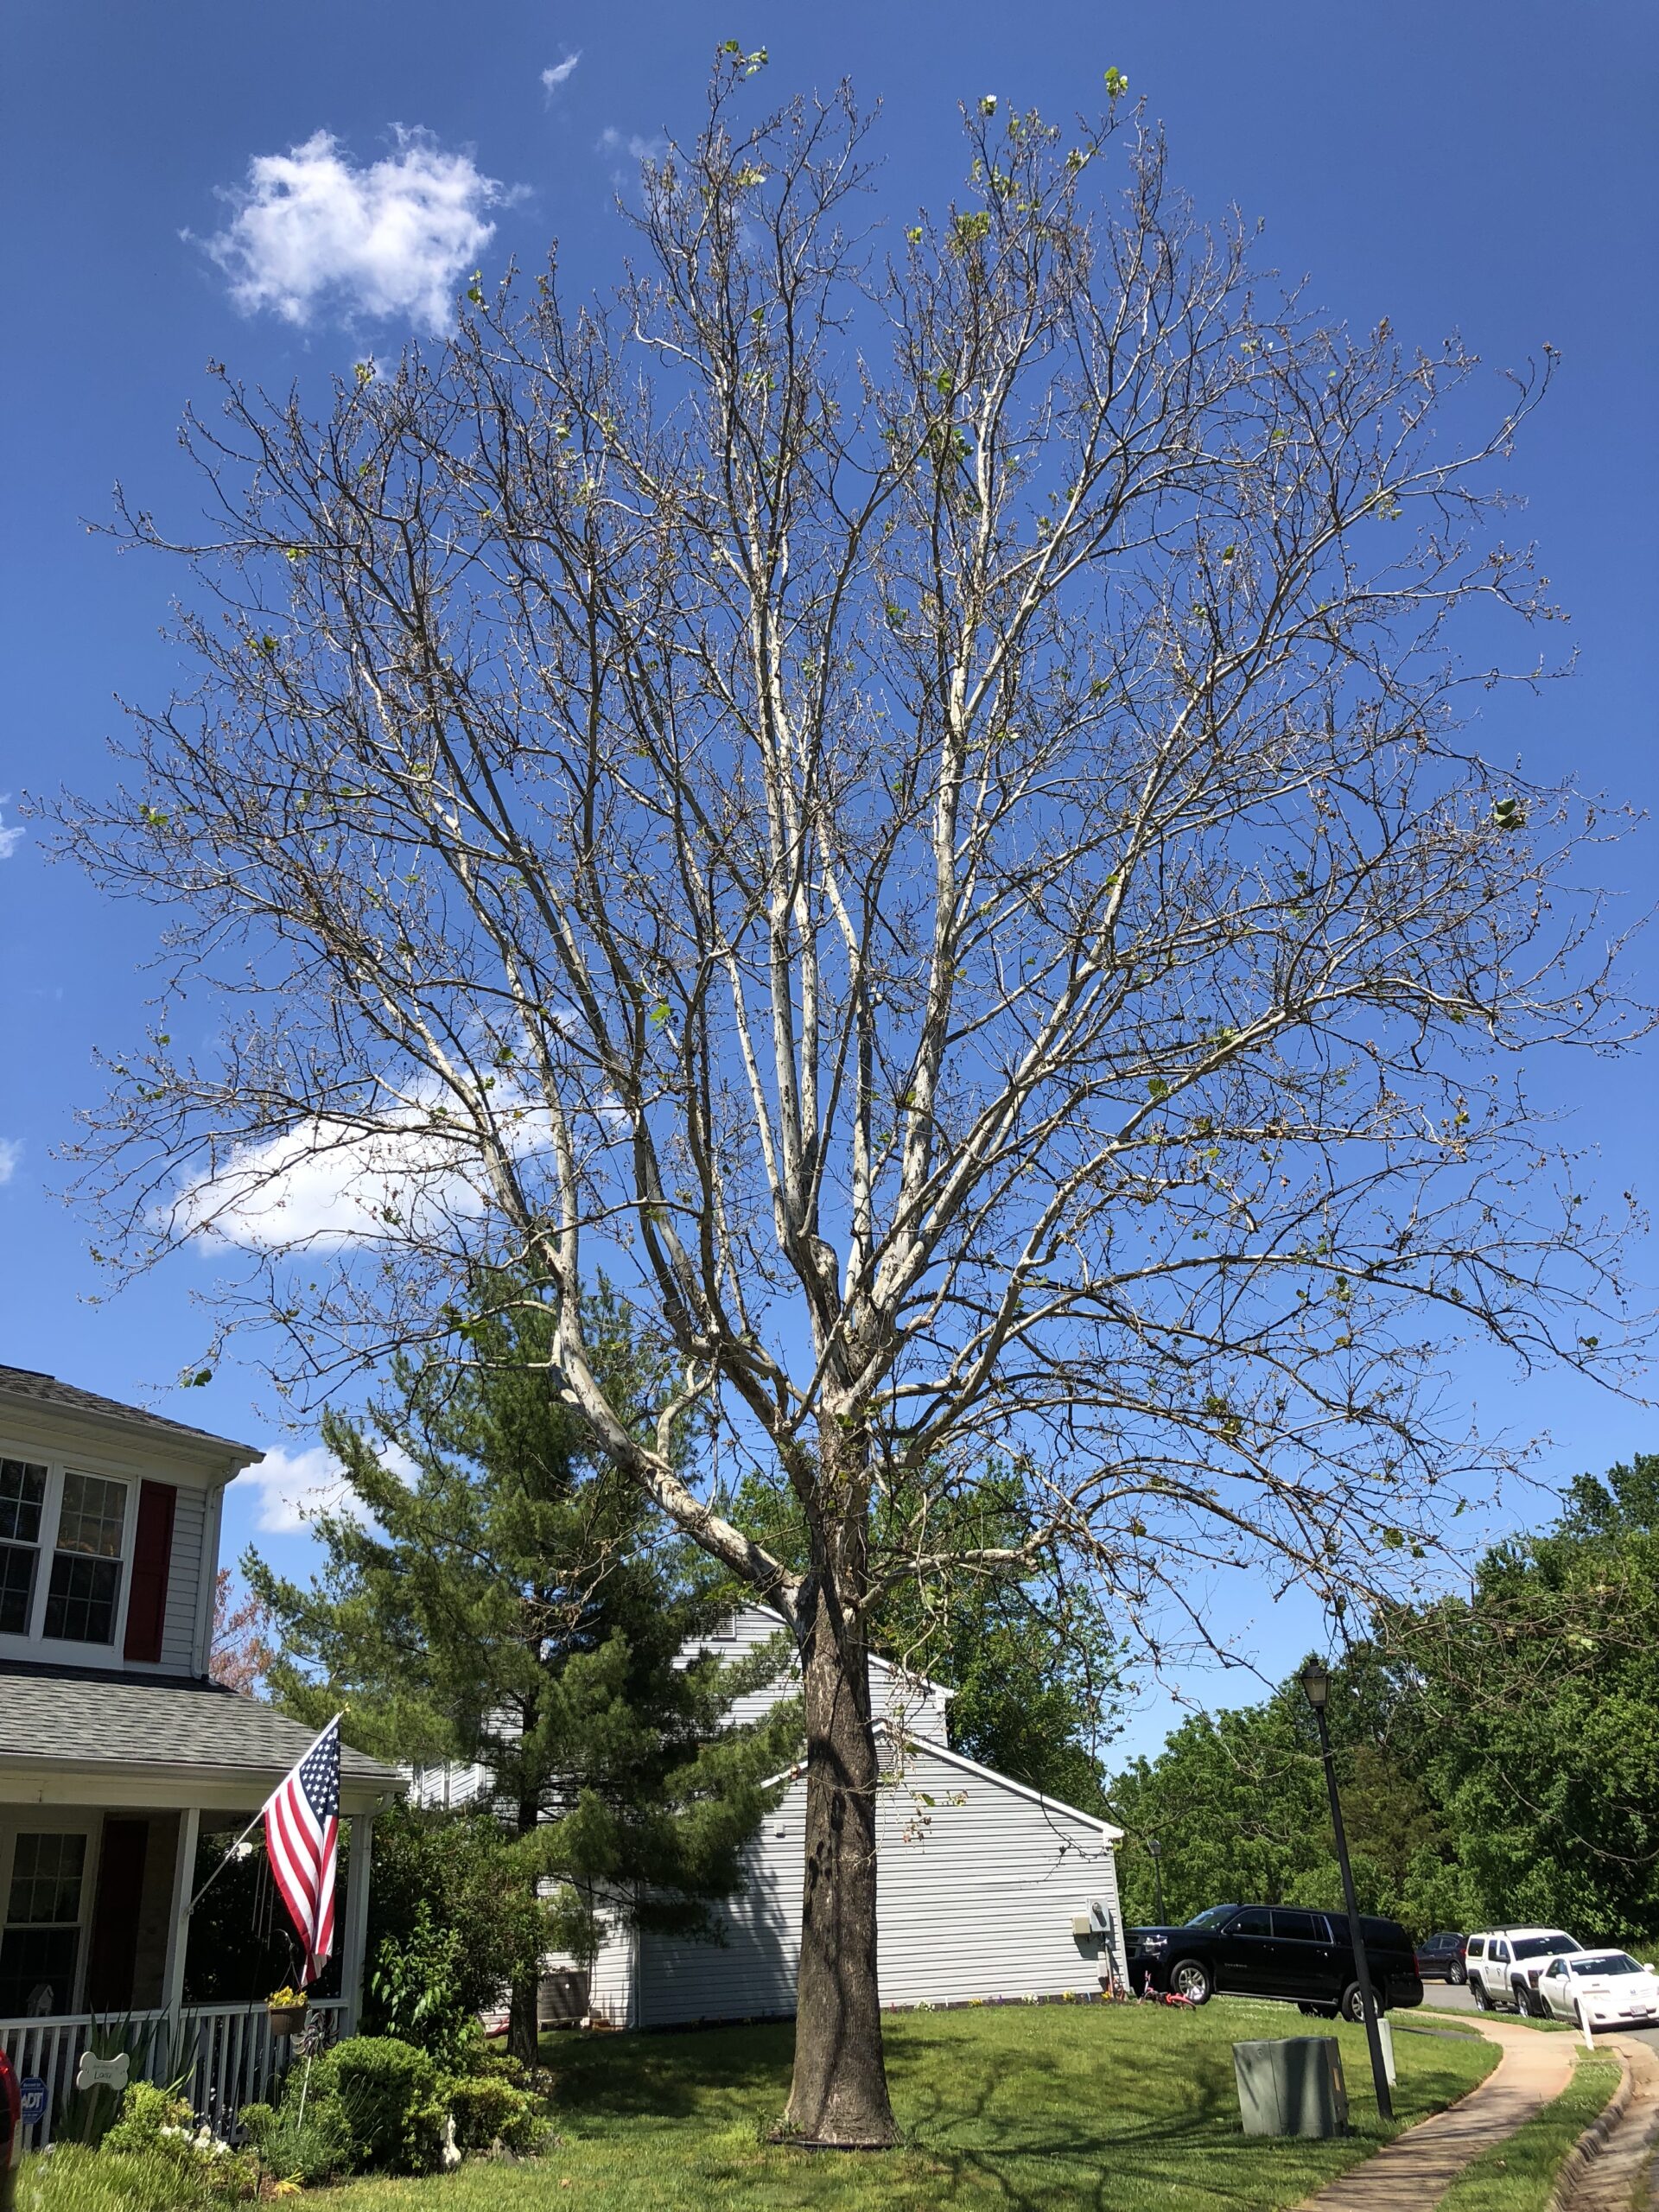 2020-05-30_14_53_30_An_American_sycamore_with_a_severe_infection_of_Sycamore_anthracnose_along_Tranquility_Lane_in_the_Franklin_Farm_section_of_Oak_Hill,_Fairfax_County,_Virginia